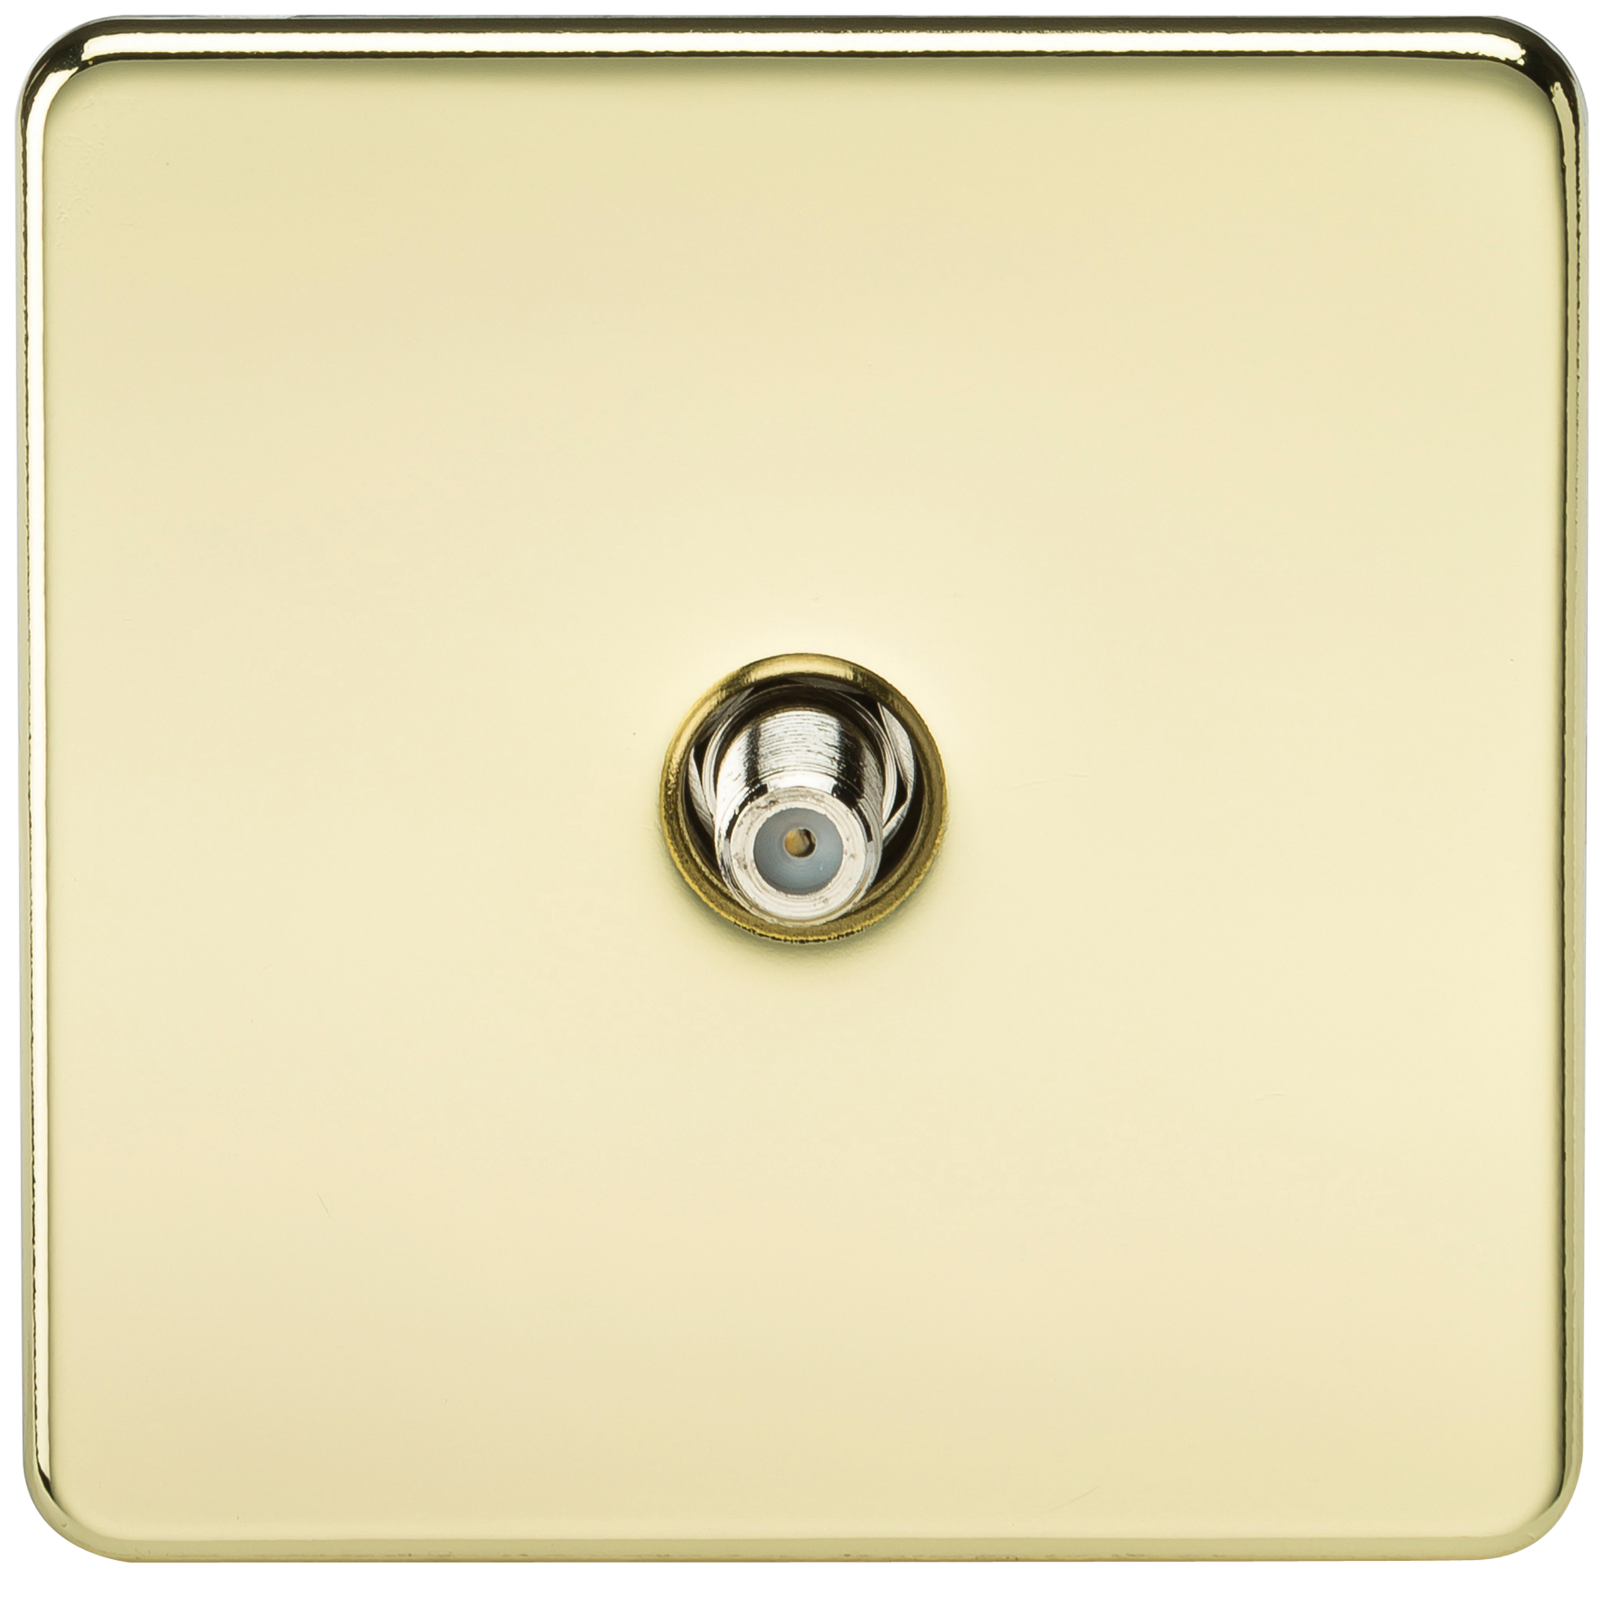 Screwless 1G SAT TV Outlet (Non-Isolated) - Polished Brass - SF0150PB 